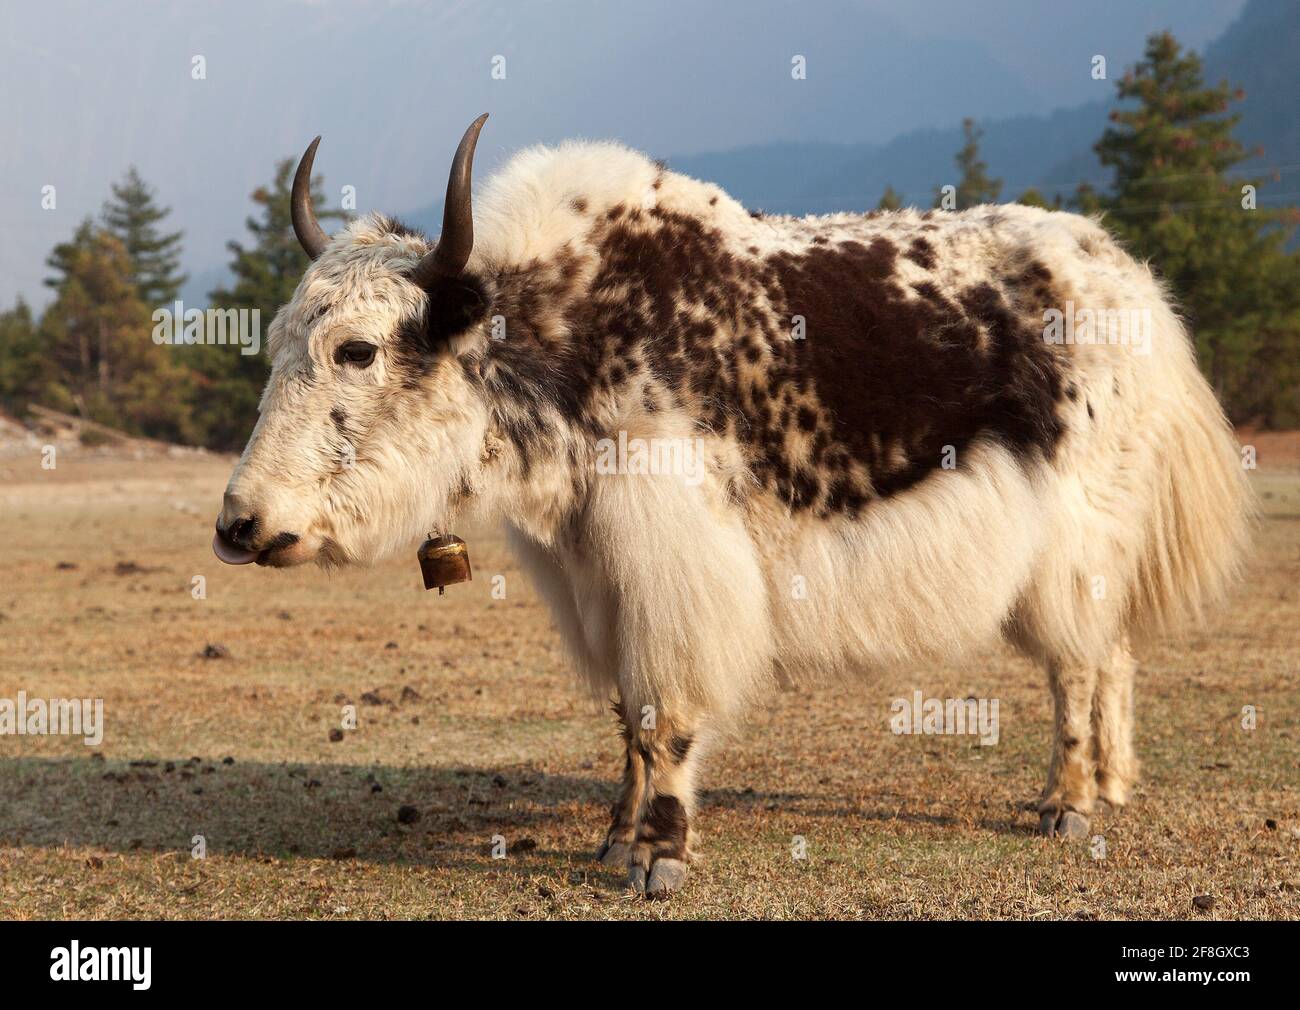 White and Brown yak on meadow Stock Photo